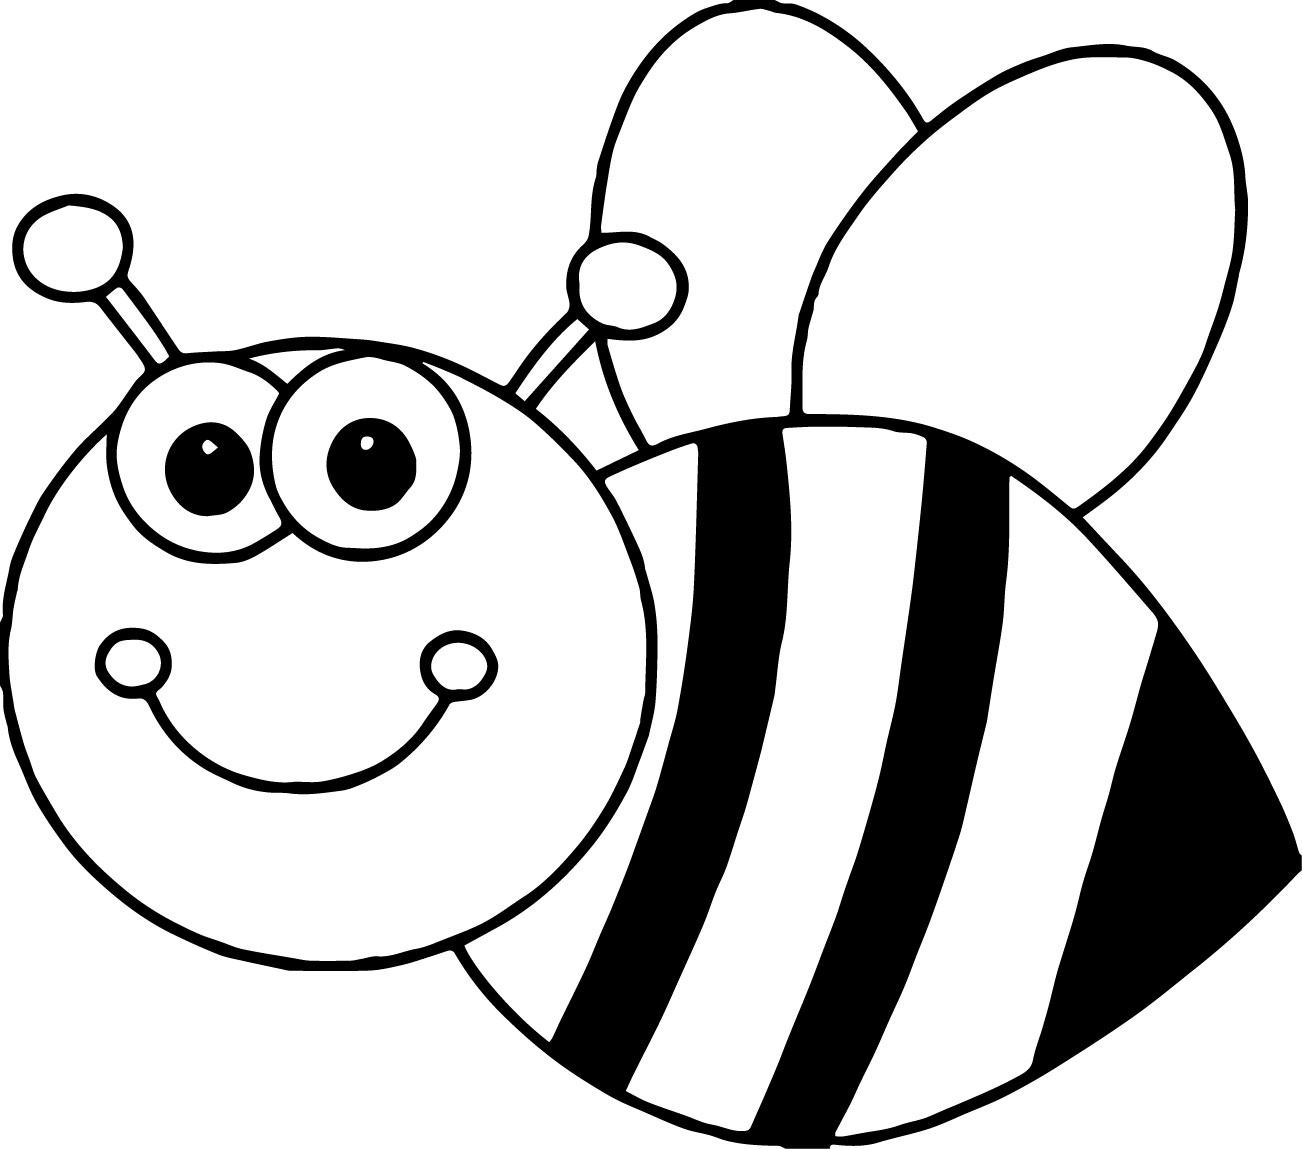 Bumble Bee Coloring Page Sheets, draw bumble bee coloring pages